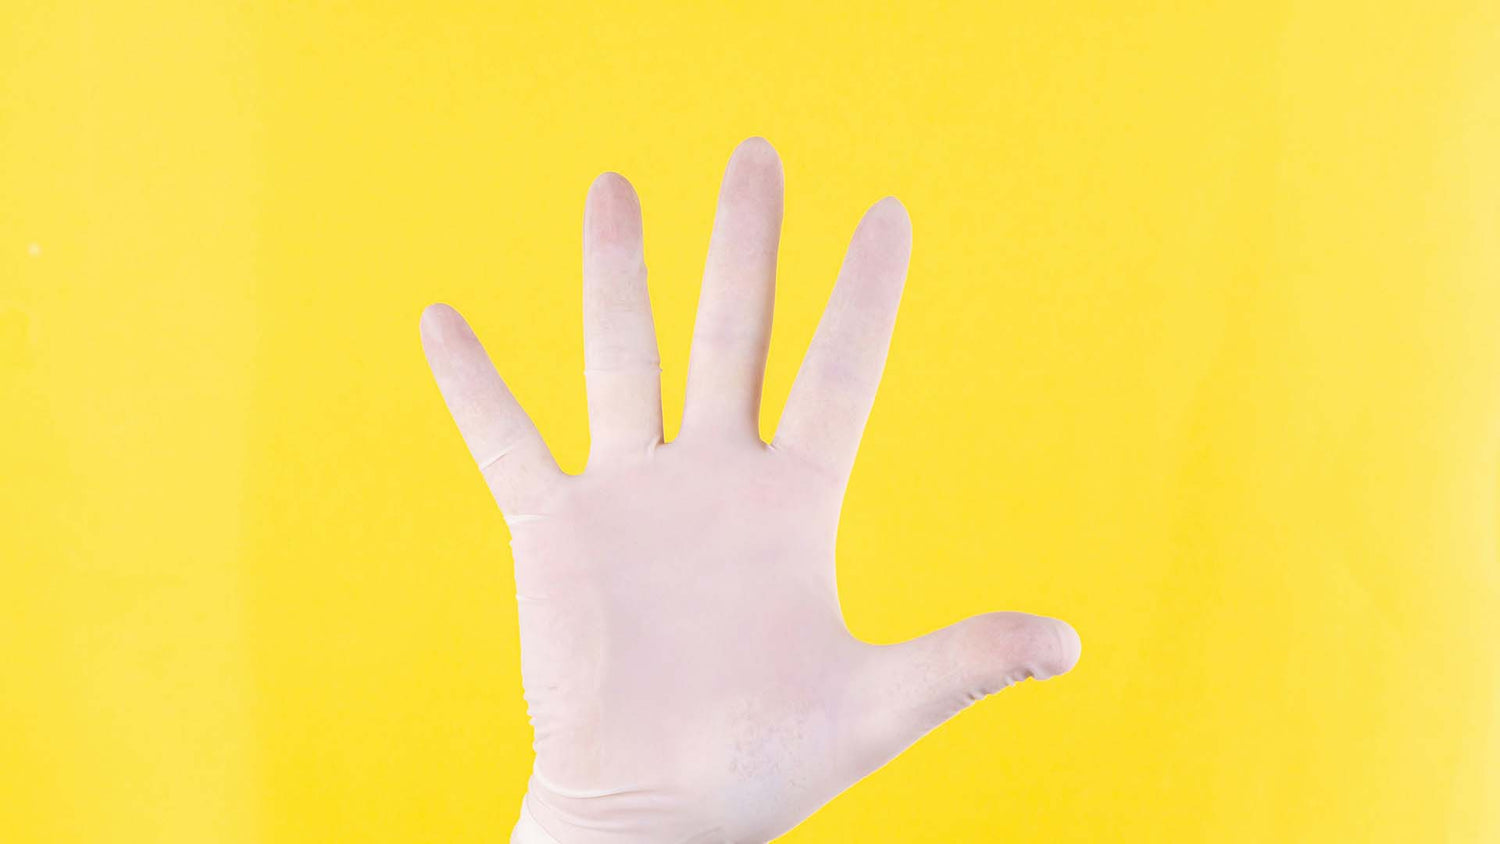 Hand in white glove against yellow background